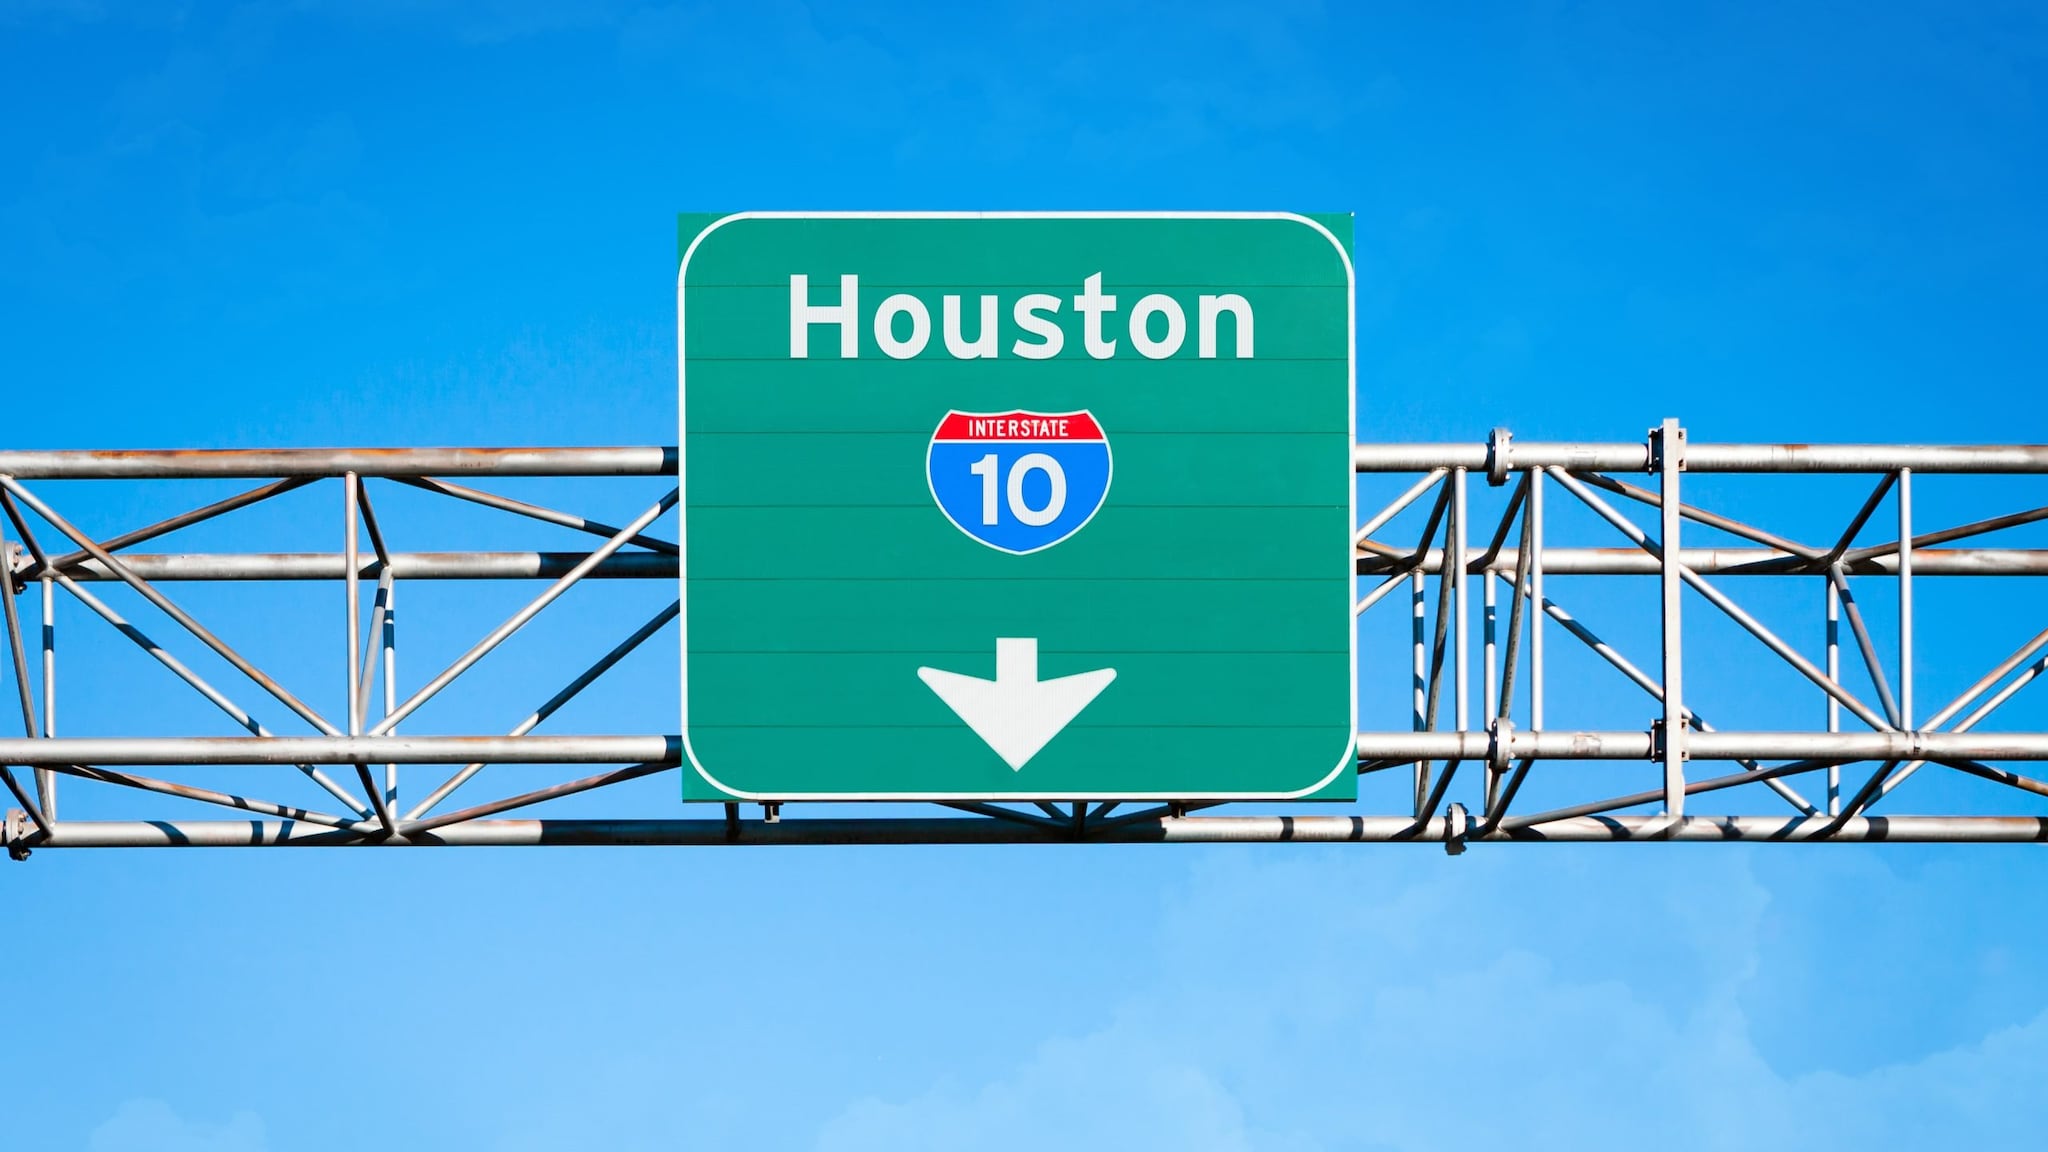 Highway exit sign for Houston